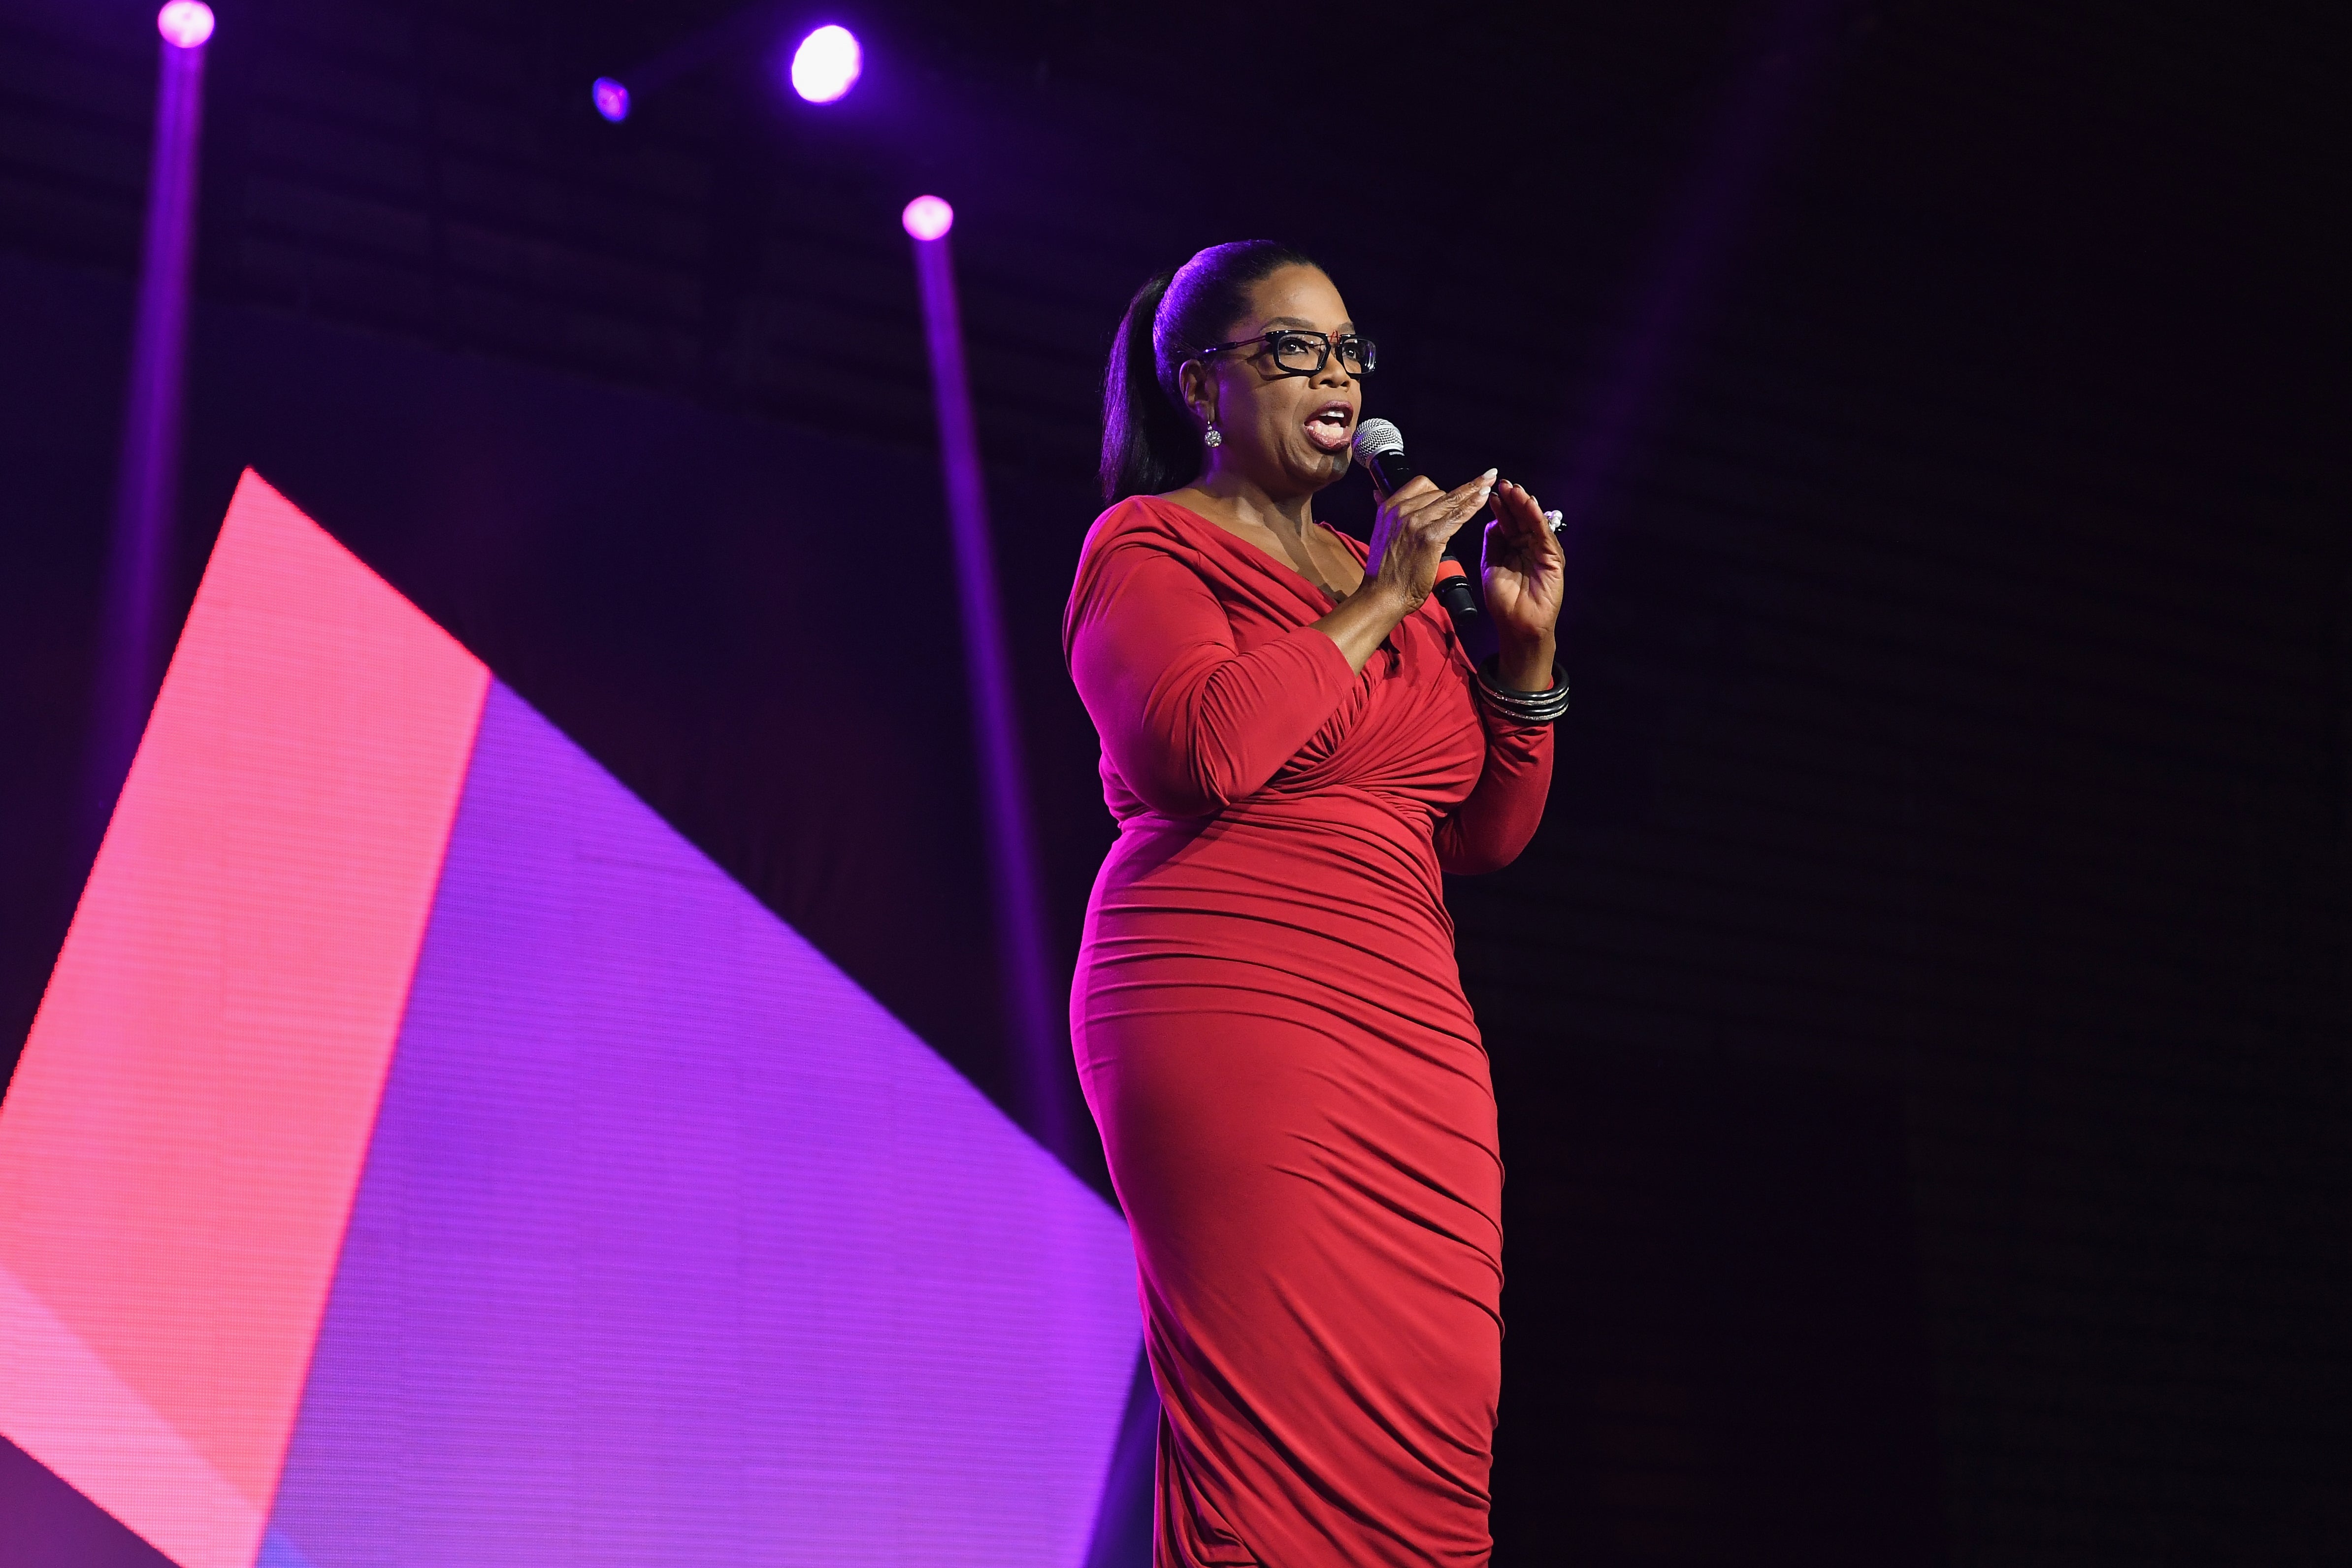 Oprah Delivers Inspiring Speech At ESSENCE Festival - Watch it Here!
